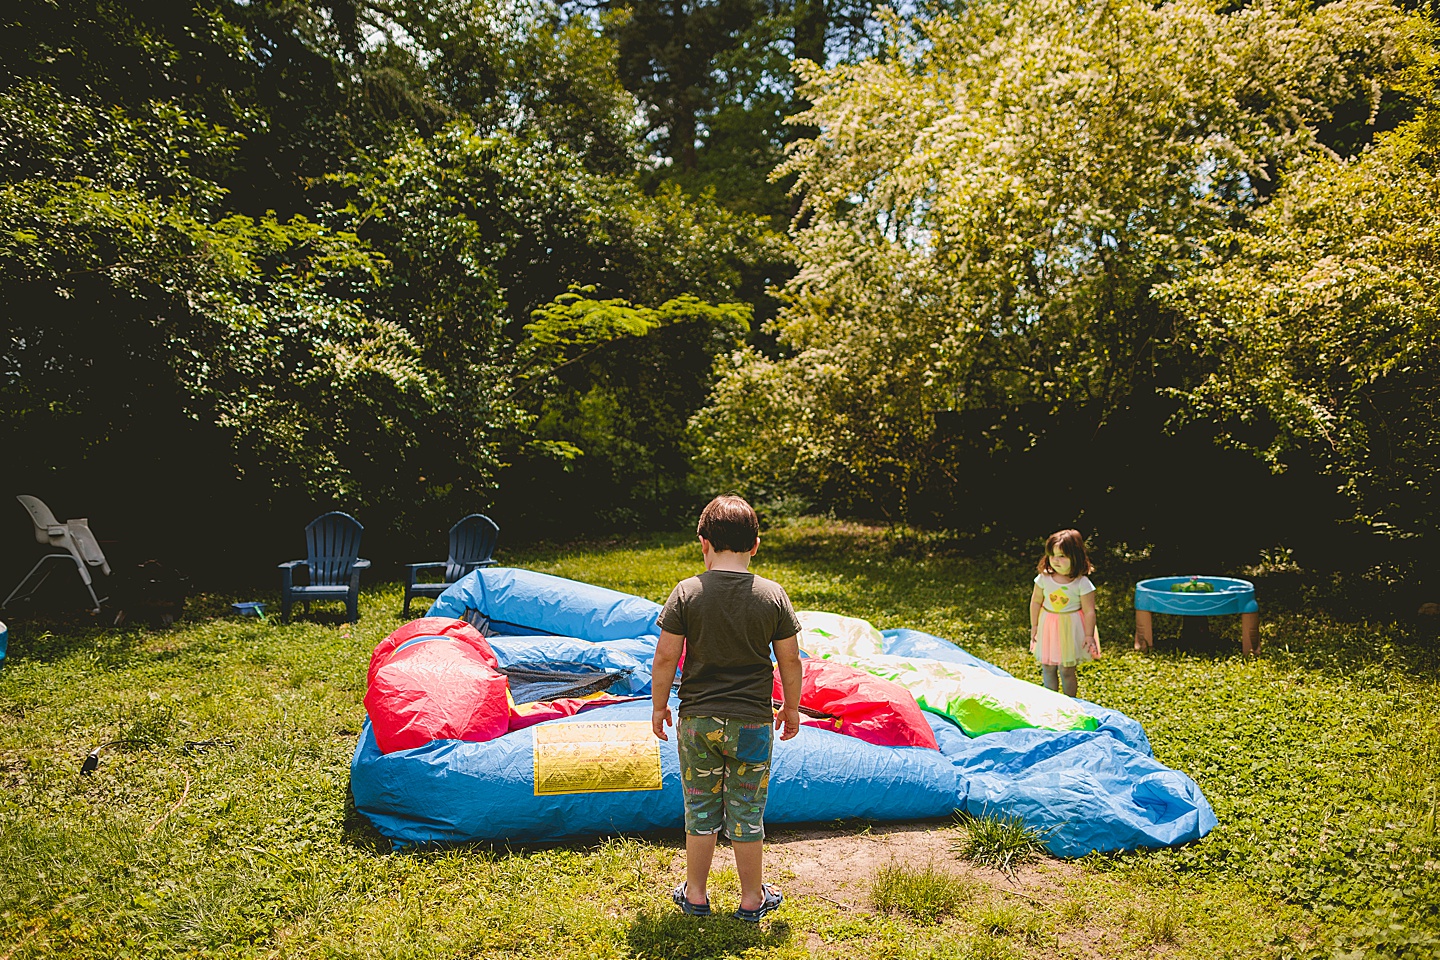 Kids go outside and stand by deflated bounce house